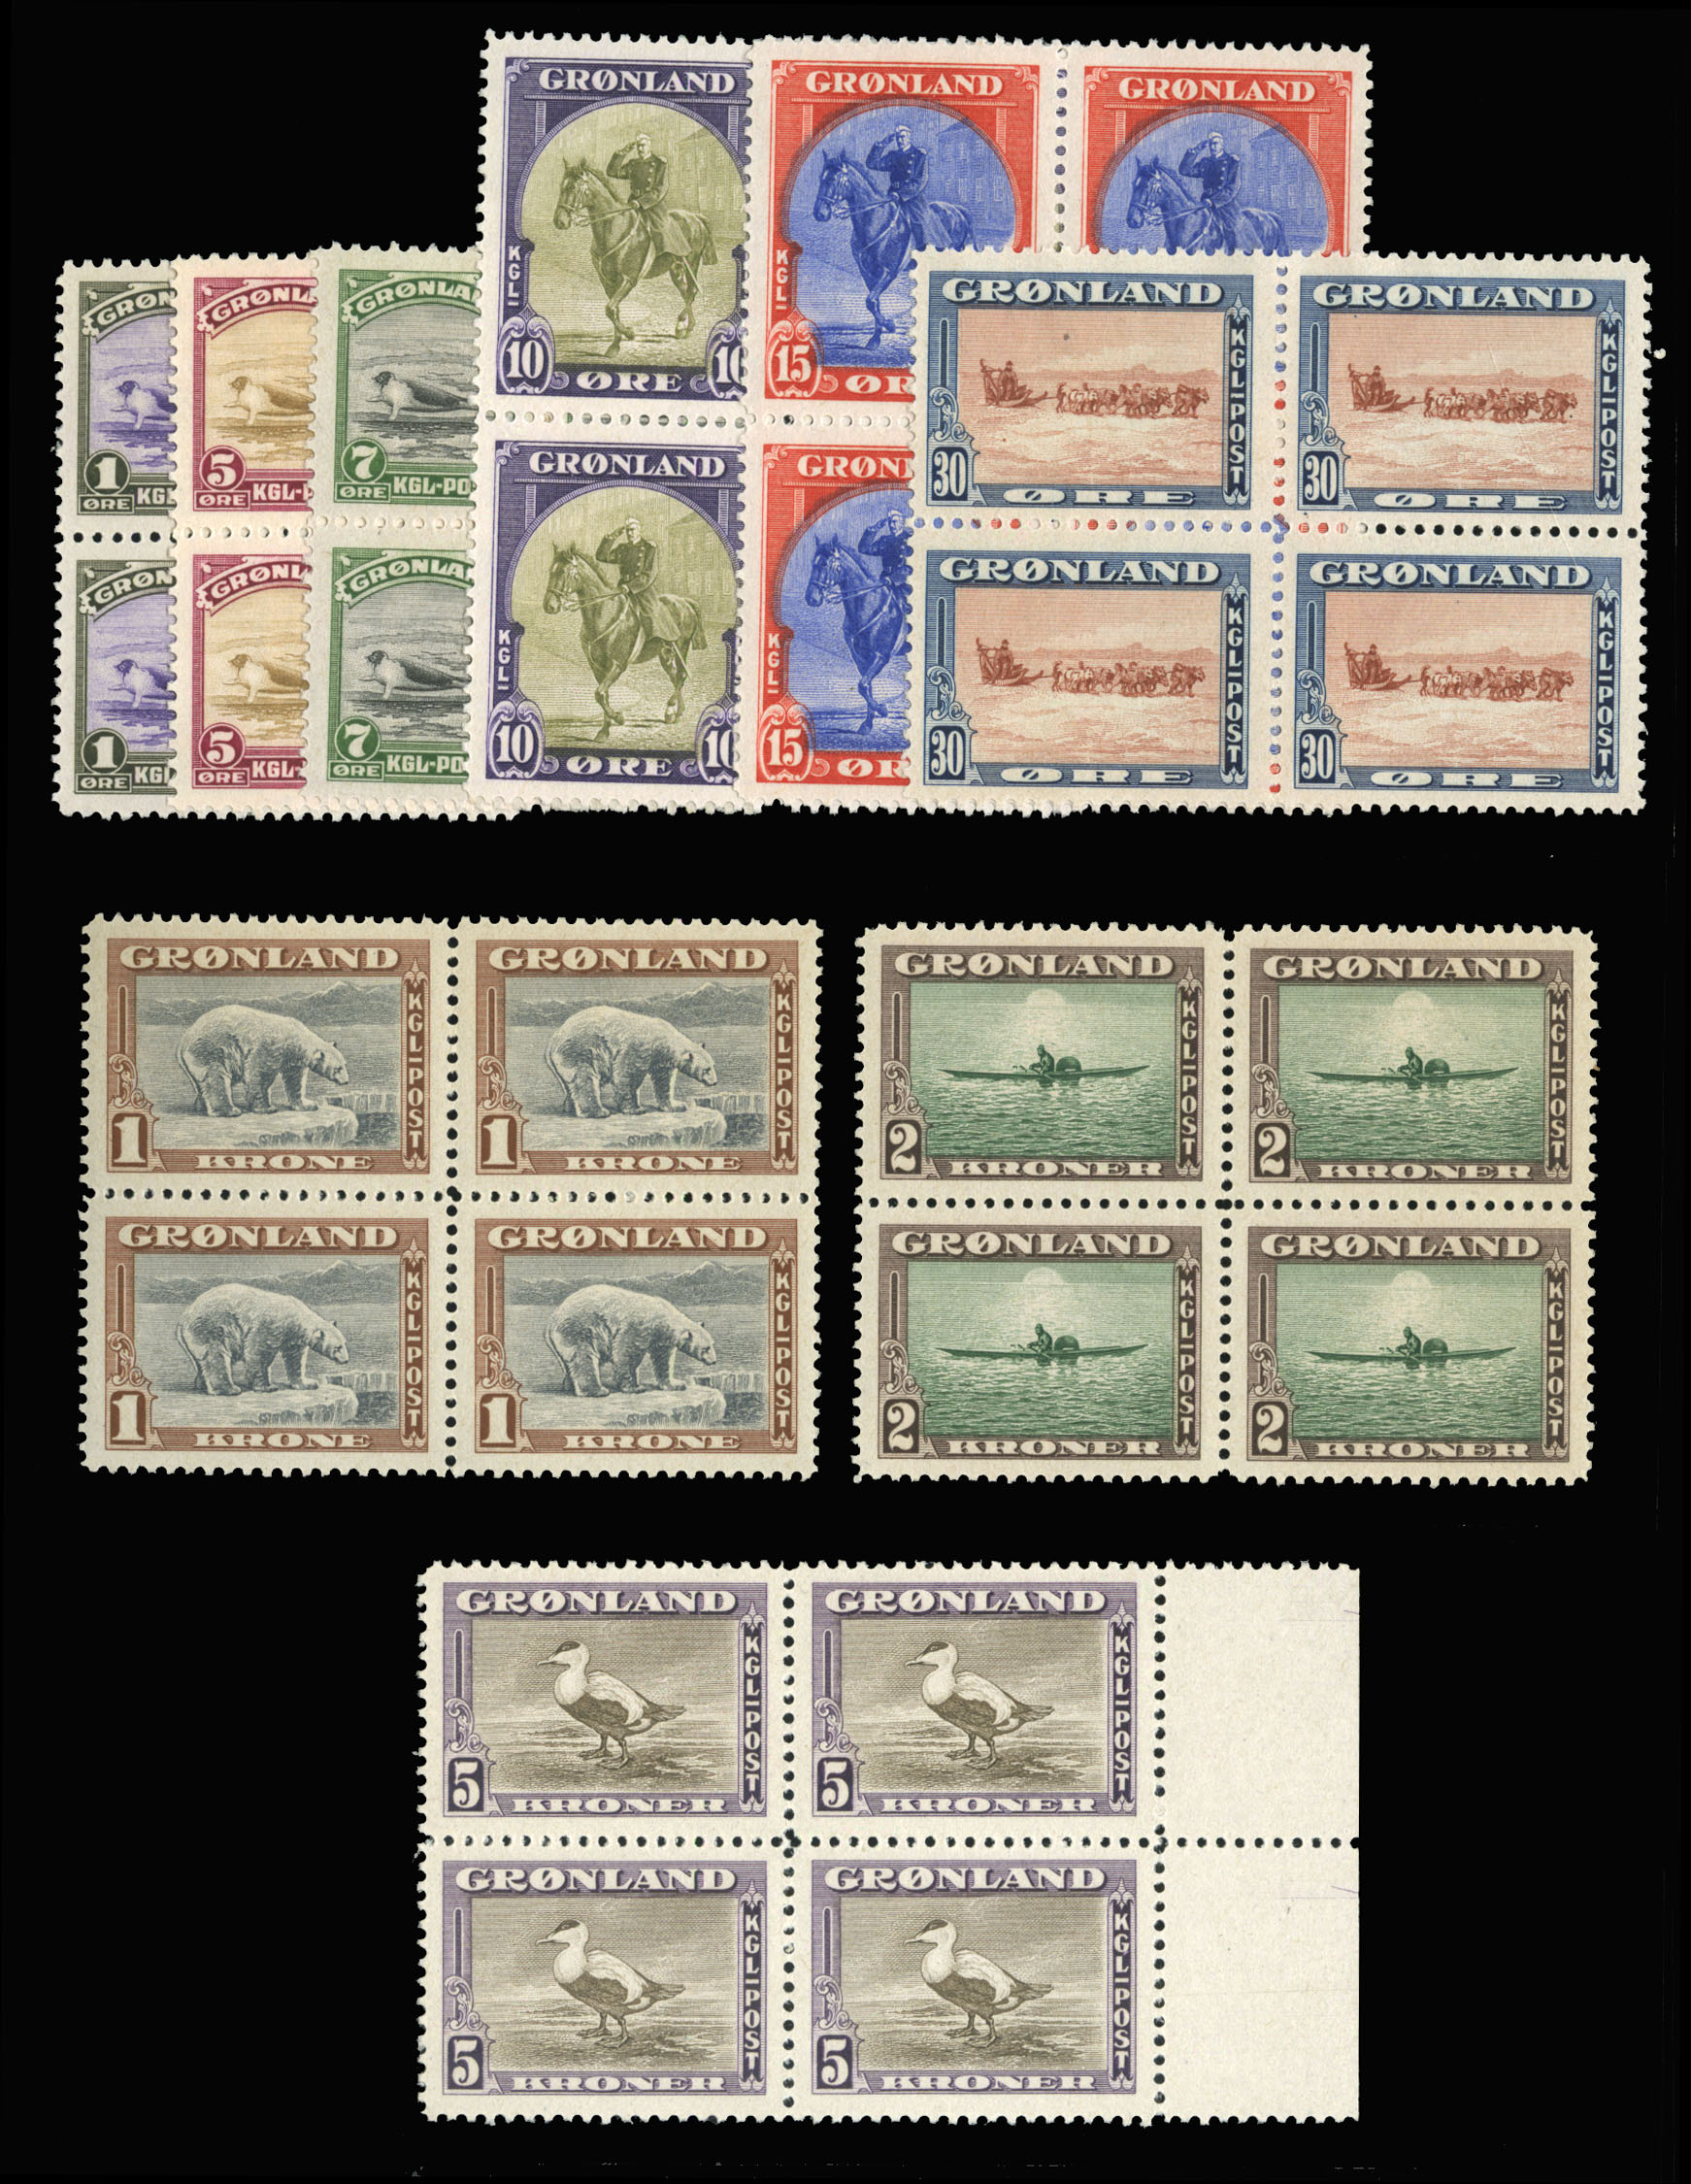 Lot 939 - Lithuania  -  Cherrystone Auctions U.S. & Worldwide Stamps & Postal History